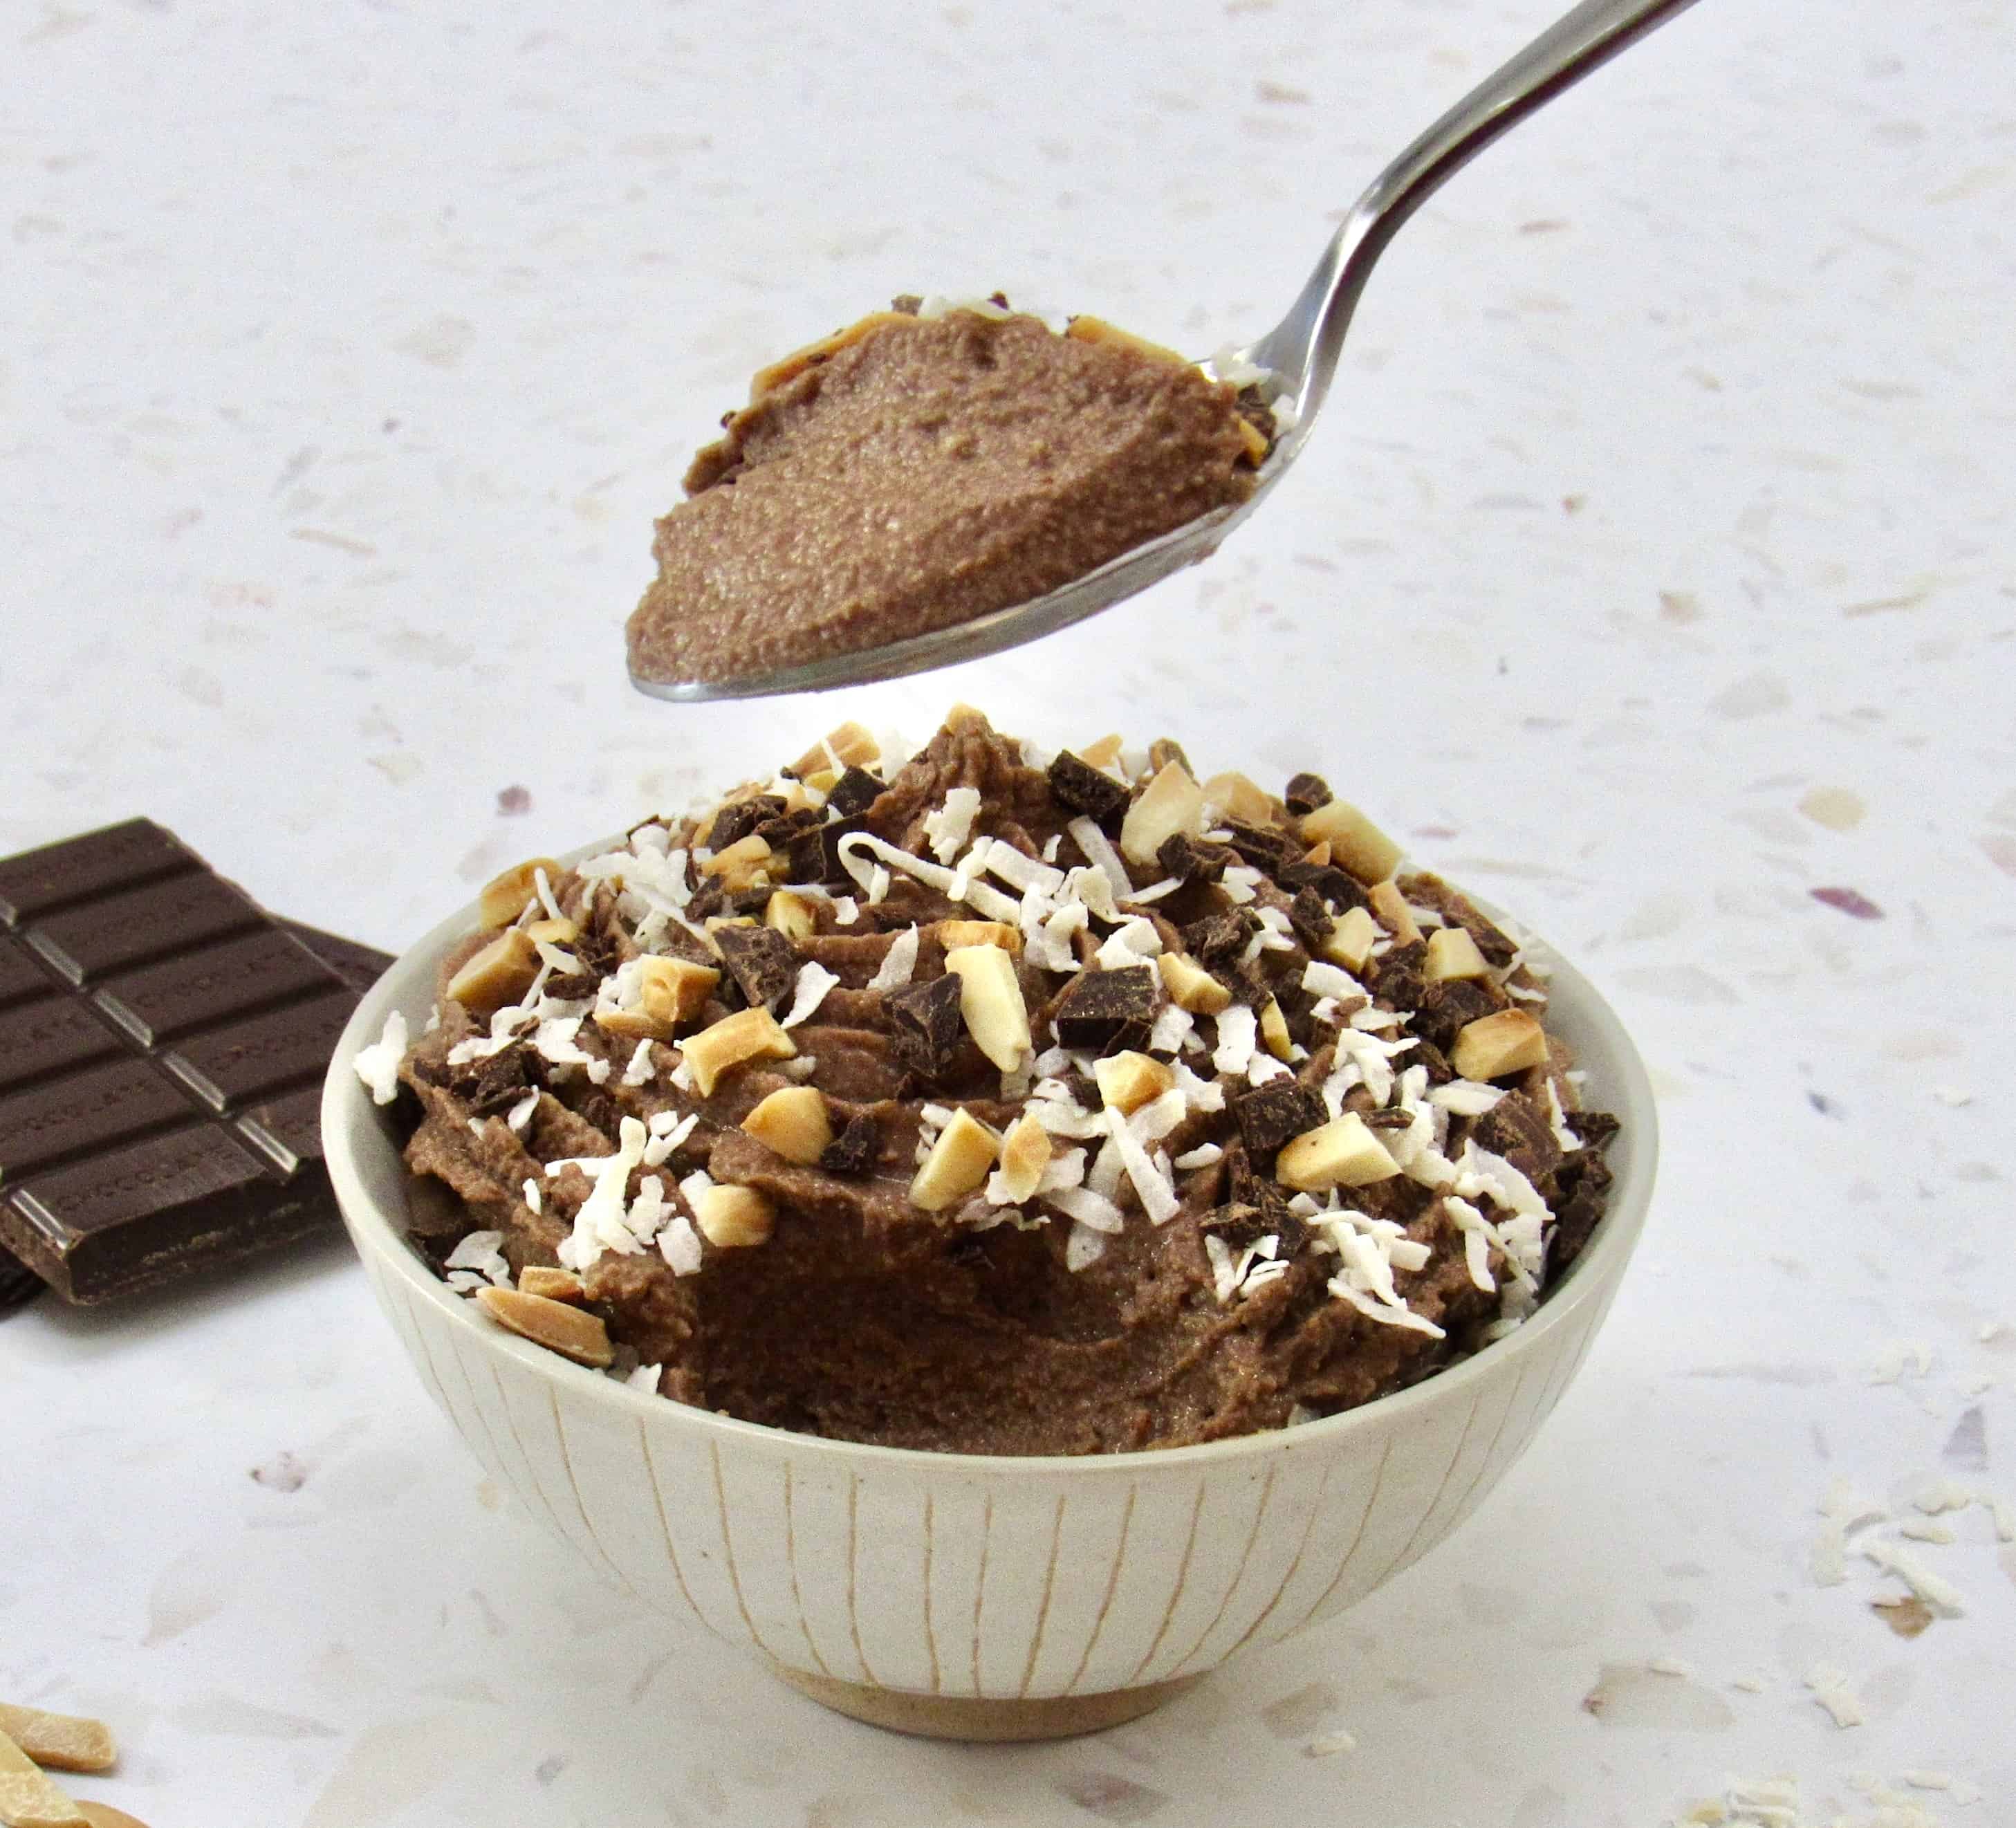 bowl of chocolate mousse with coconut and almonds on top and spoon holding up some